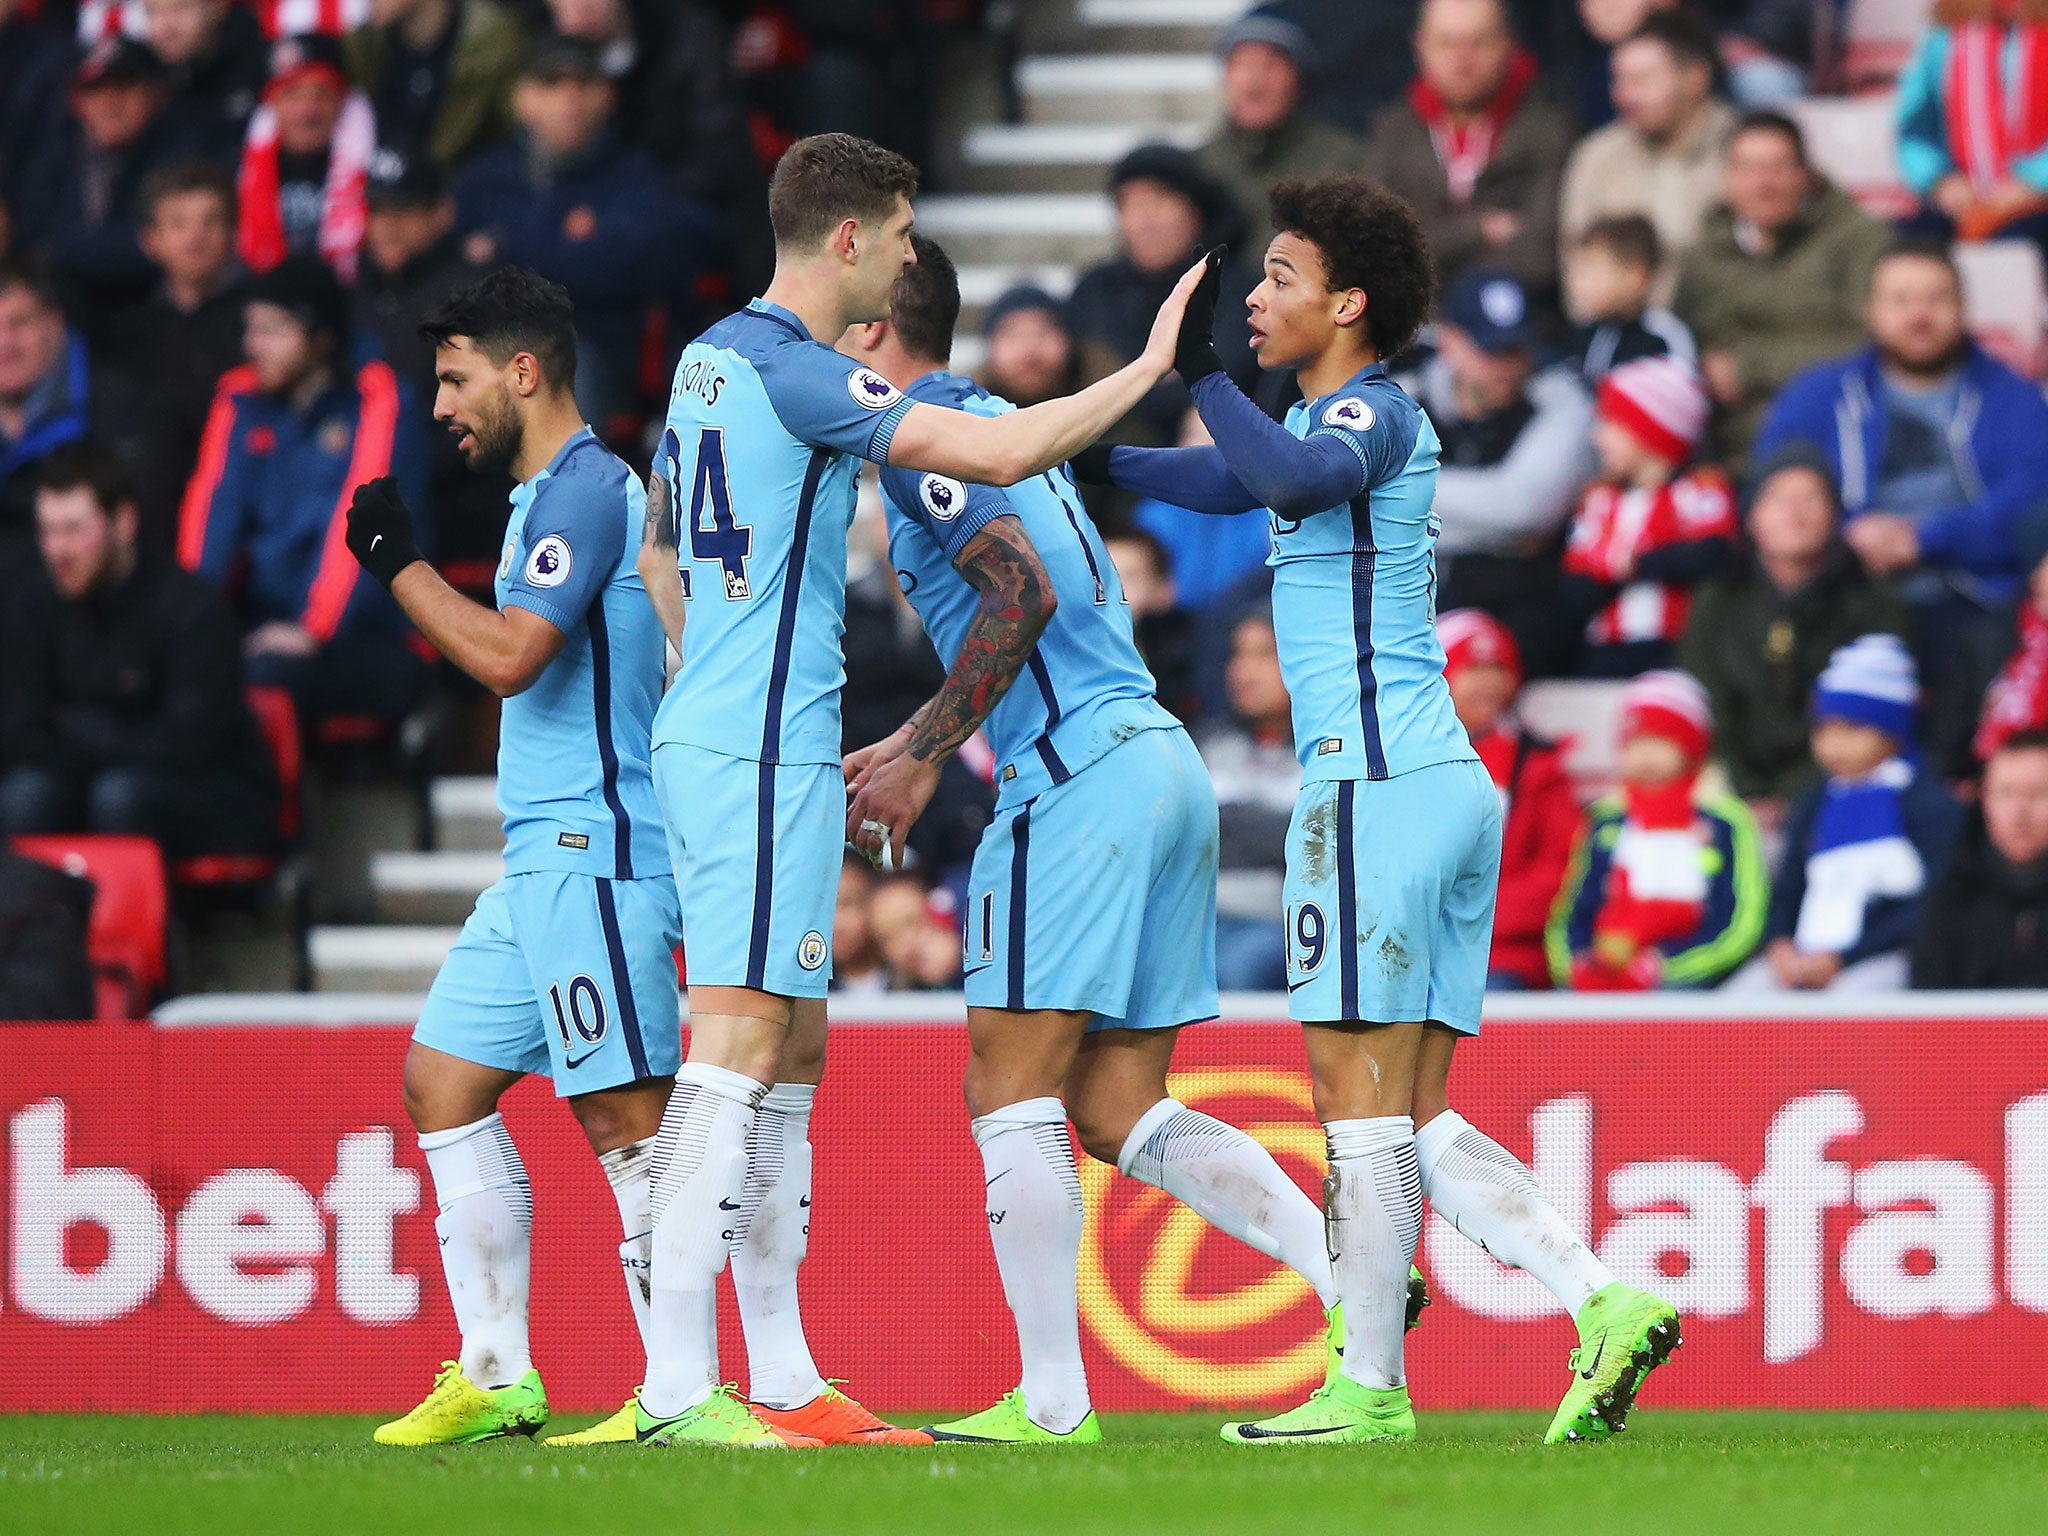 Leroy Sane celebrates with team-mates after scoring for his side